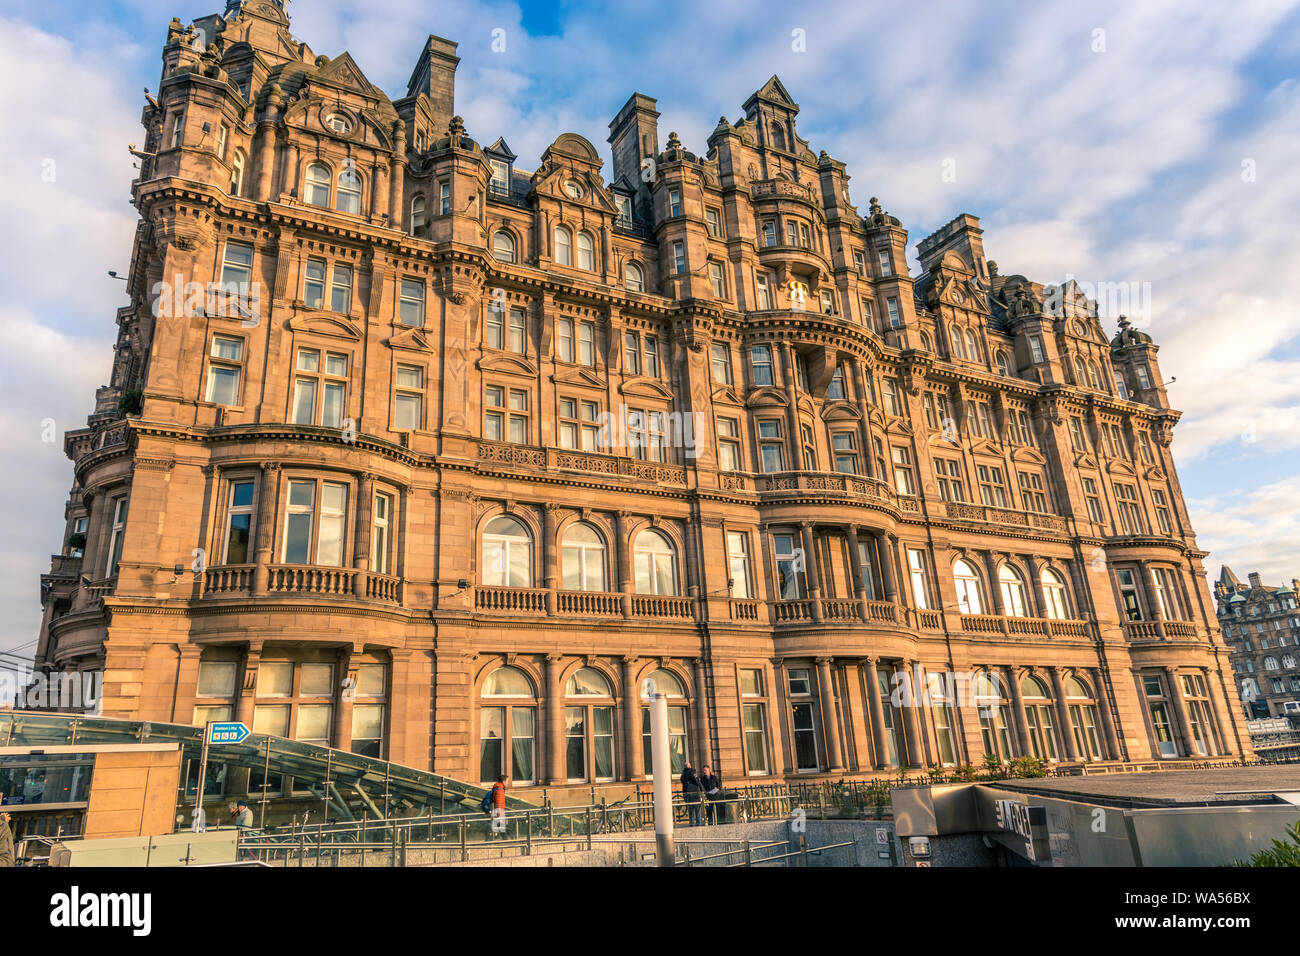 The Balmoral Hotel A Five Star Luxury Hotel In The Heart Of Edinburgh Next To The Entrance To Waverley Station Scotland Uk Stock Photo Alamy